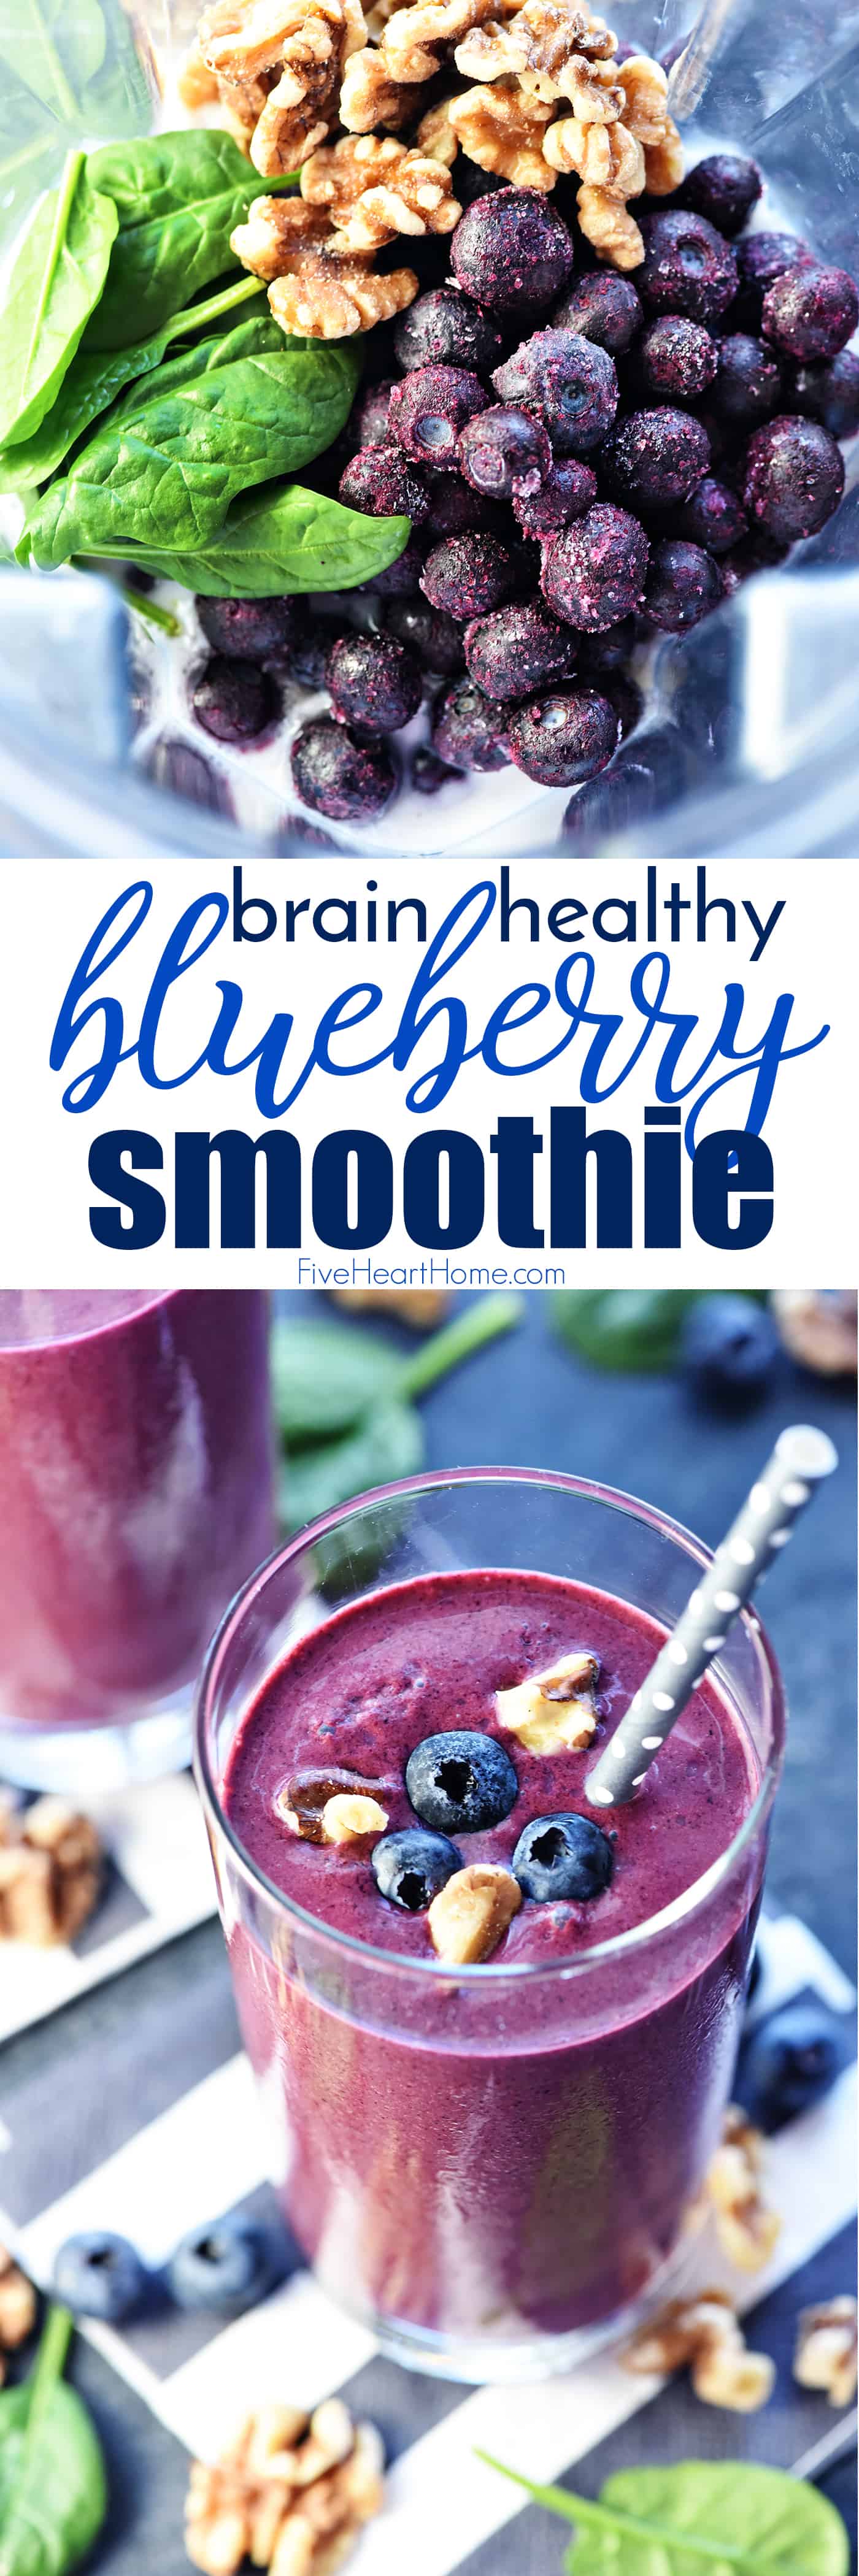 blueberries, walnuts, and spinach in a blender, and smoothie in a glass